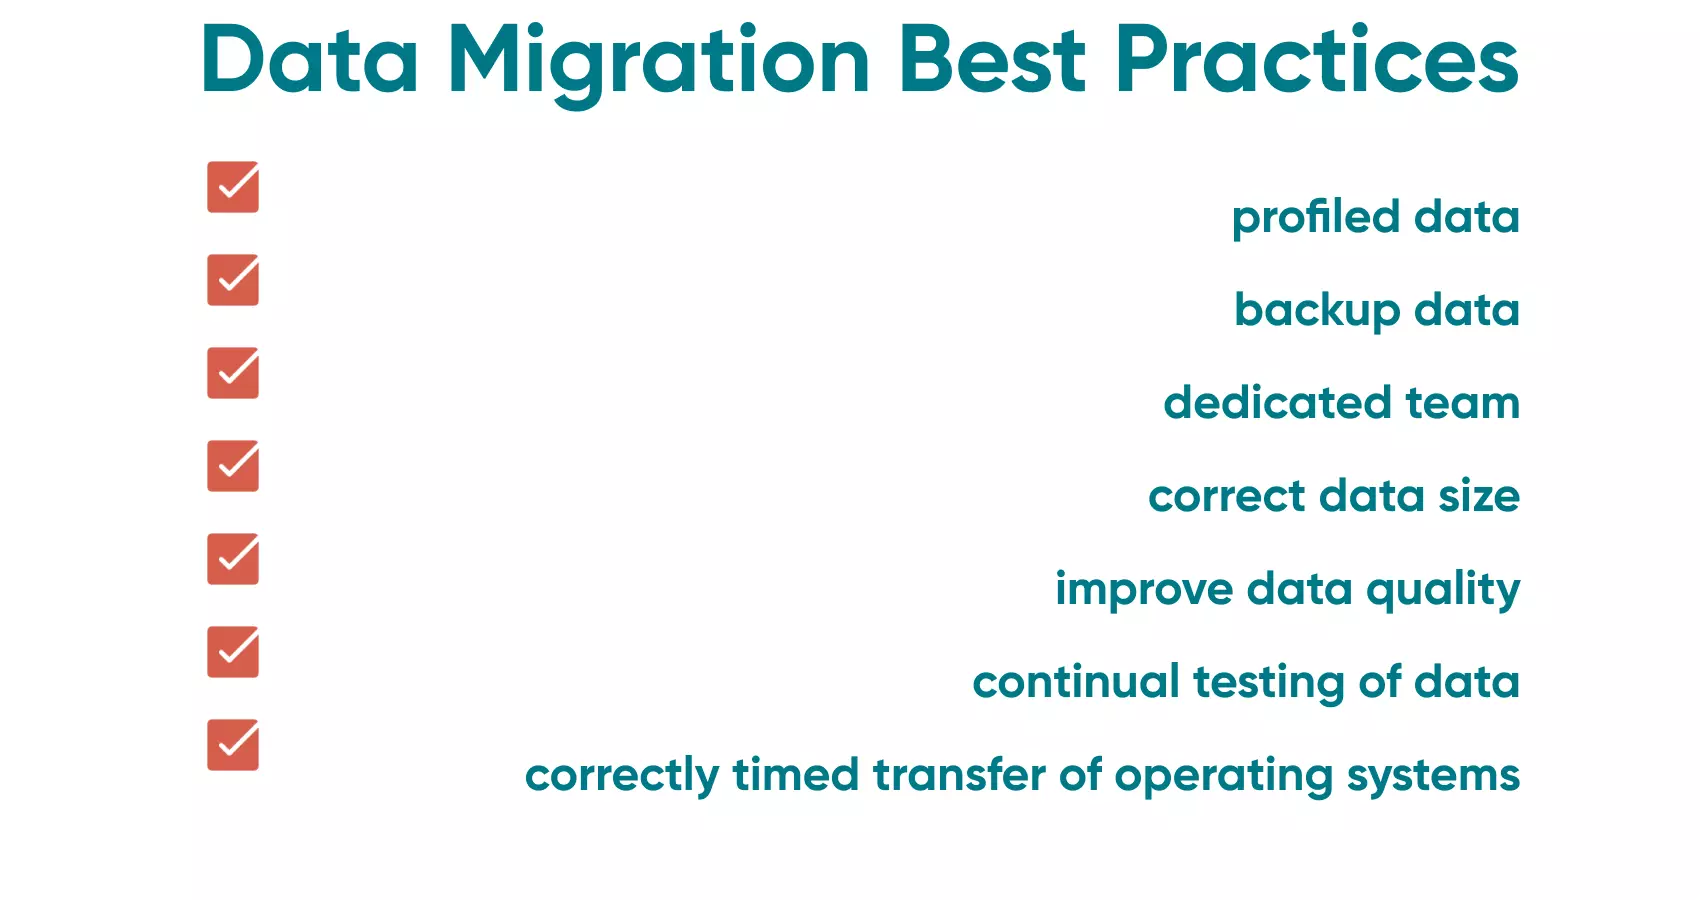 Data migration can be a complex operation, discover here the considered data migration best practices.